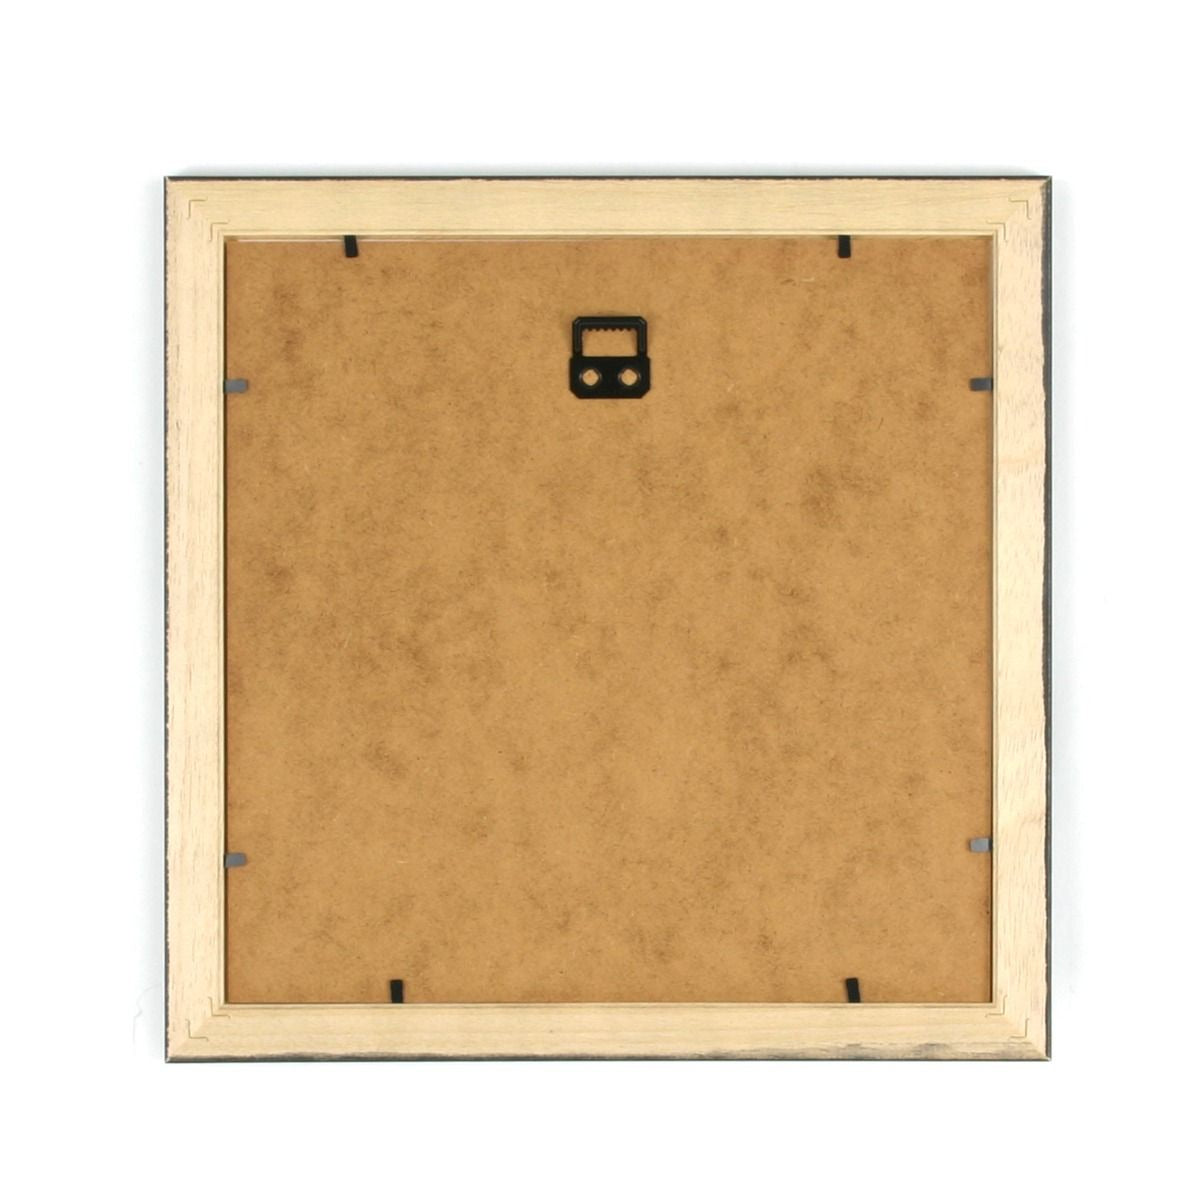 Solid wood square frame